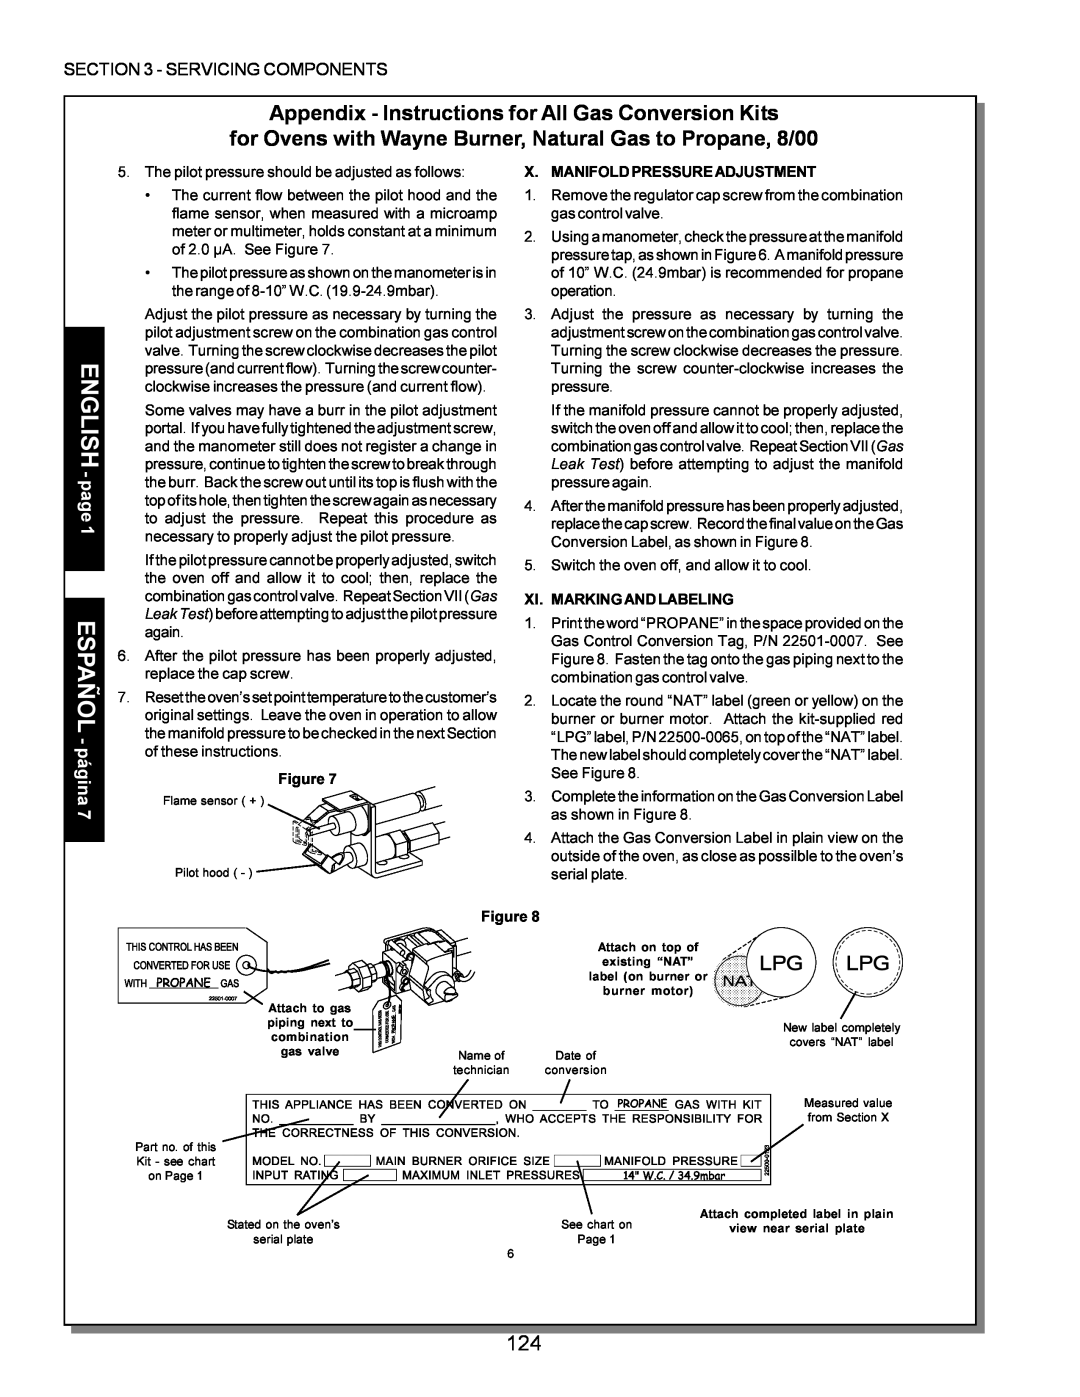 Middleby Marshall PS224 PS310, PS570 Appendix - Instructions for All Gas Conversion Kits, X. Manifold Pressure Adjustment 